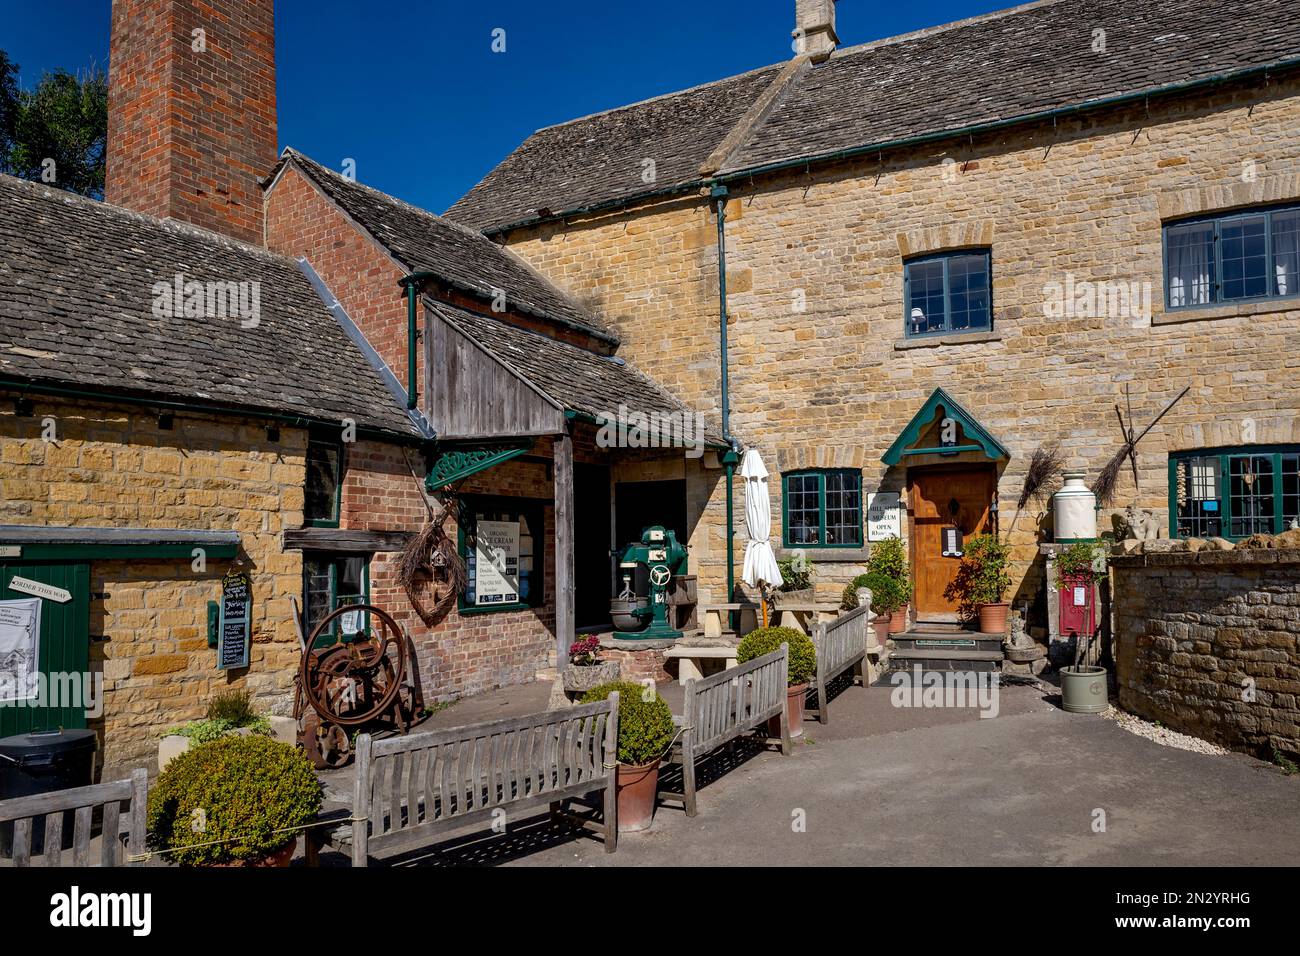 Die alte Mühle in Lower Slaughter, Cotswolds, Cheltenham, England Stockfoto